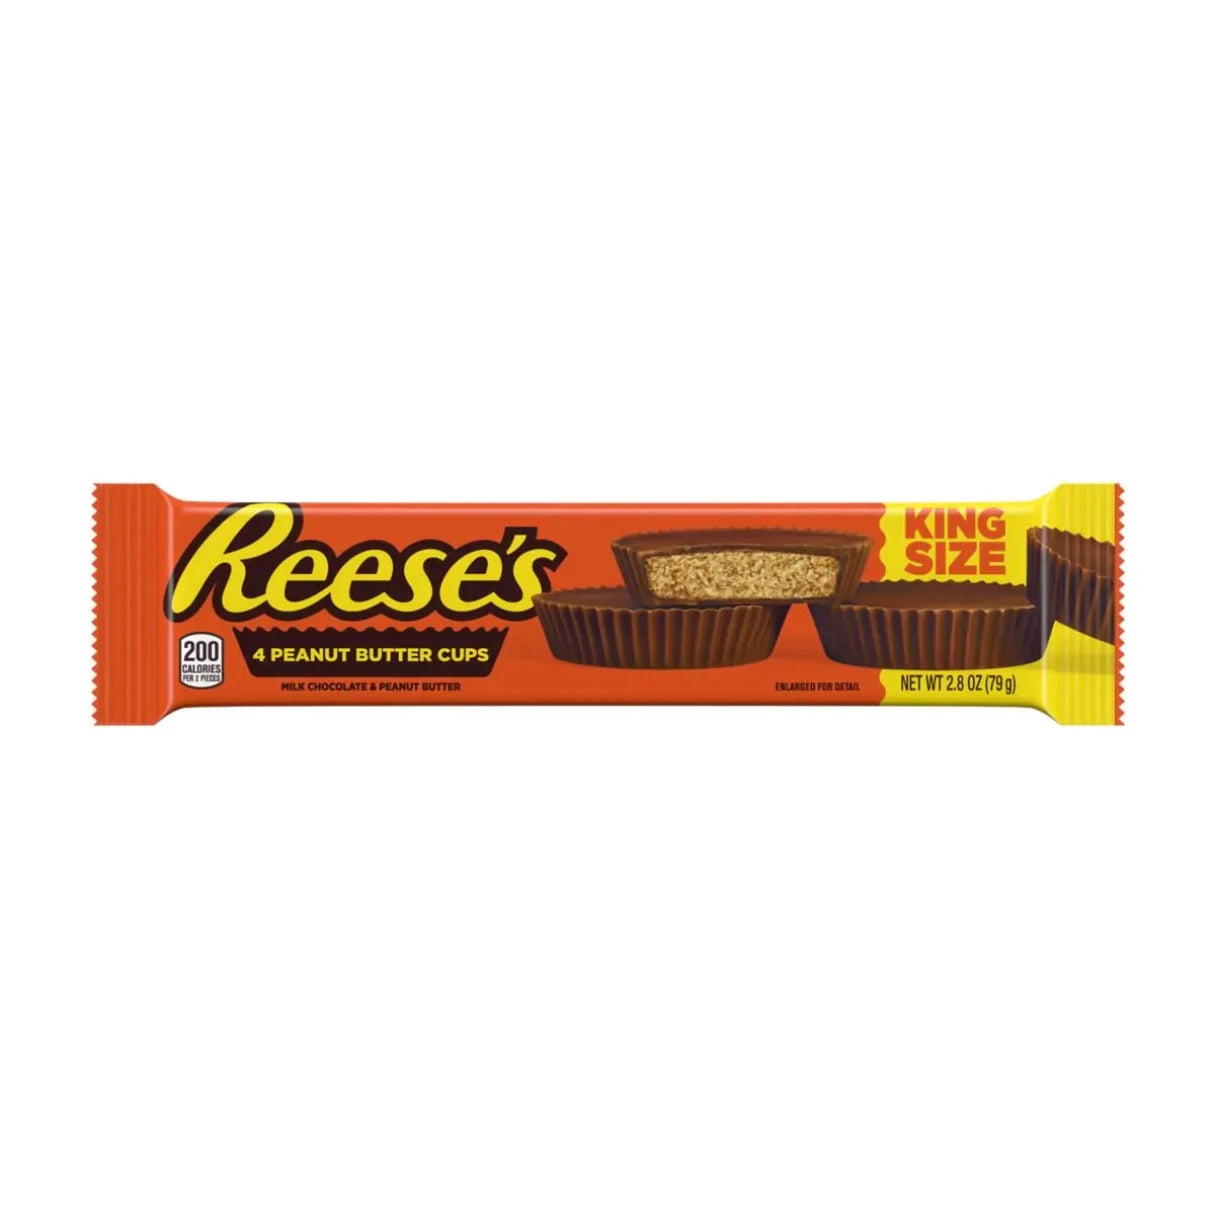 Reese's King Size 2.8oz -24ct